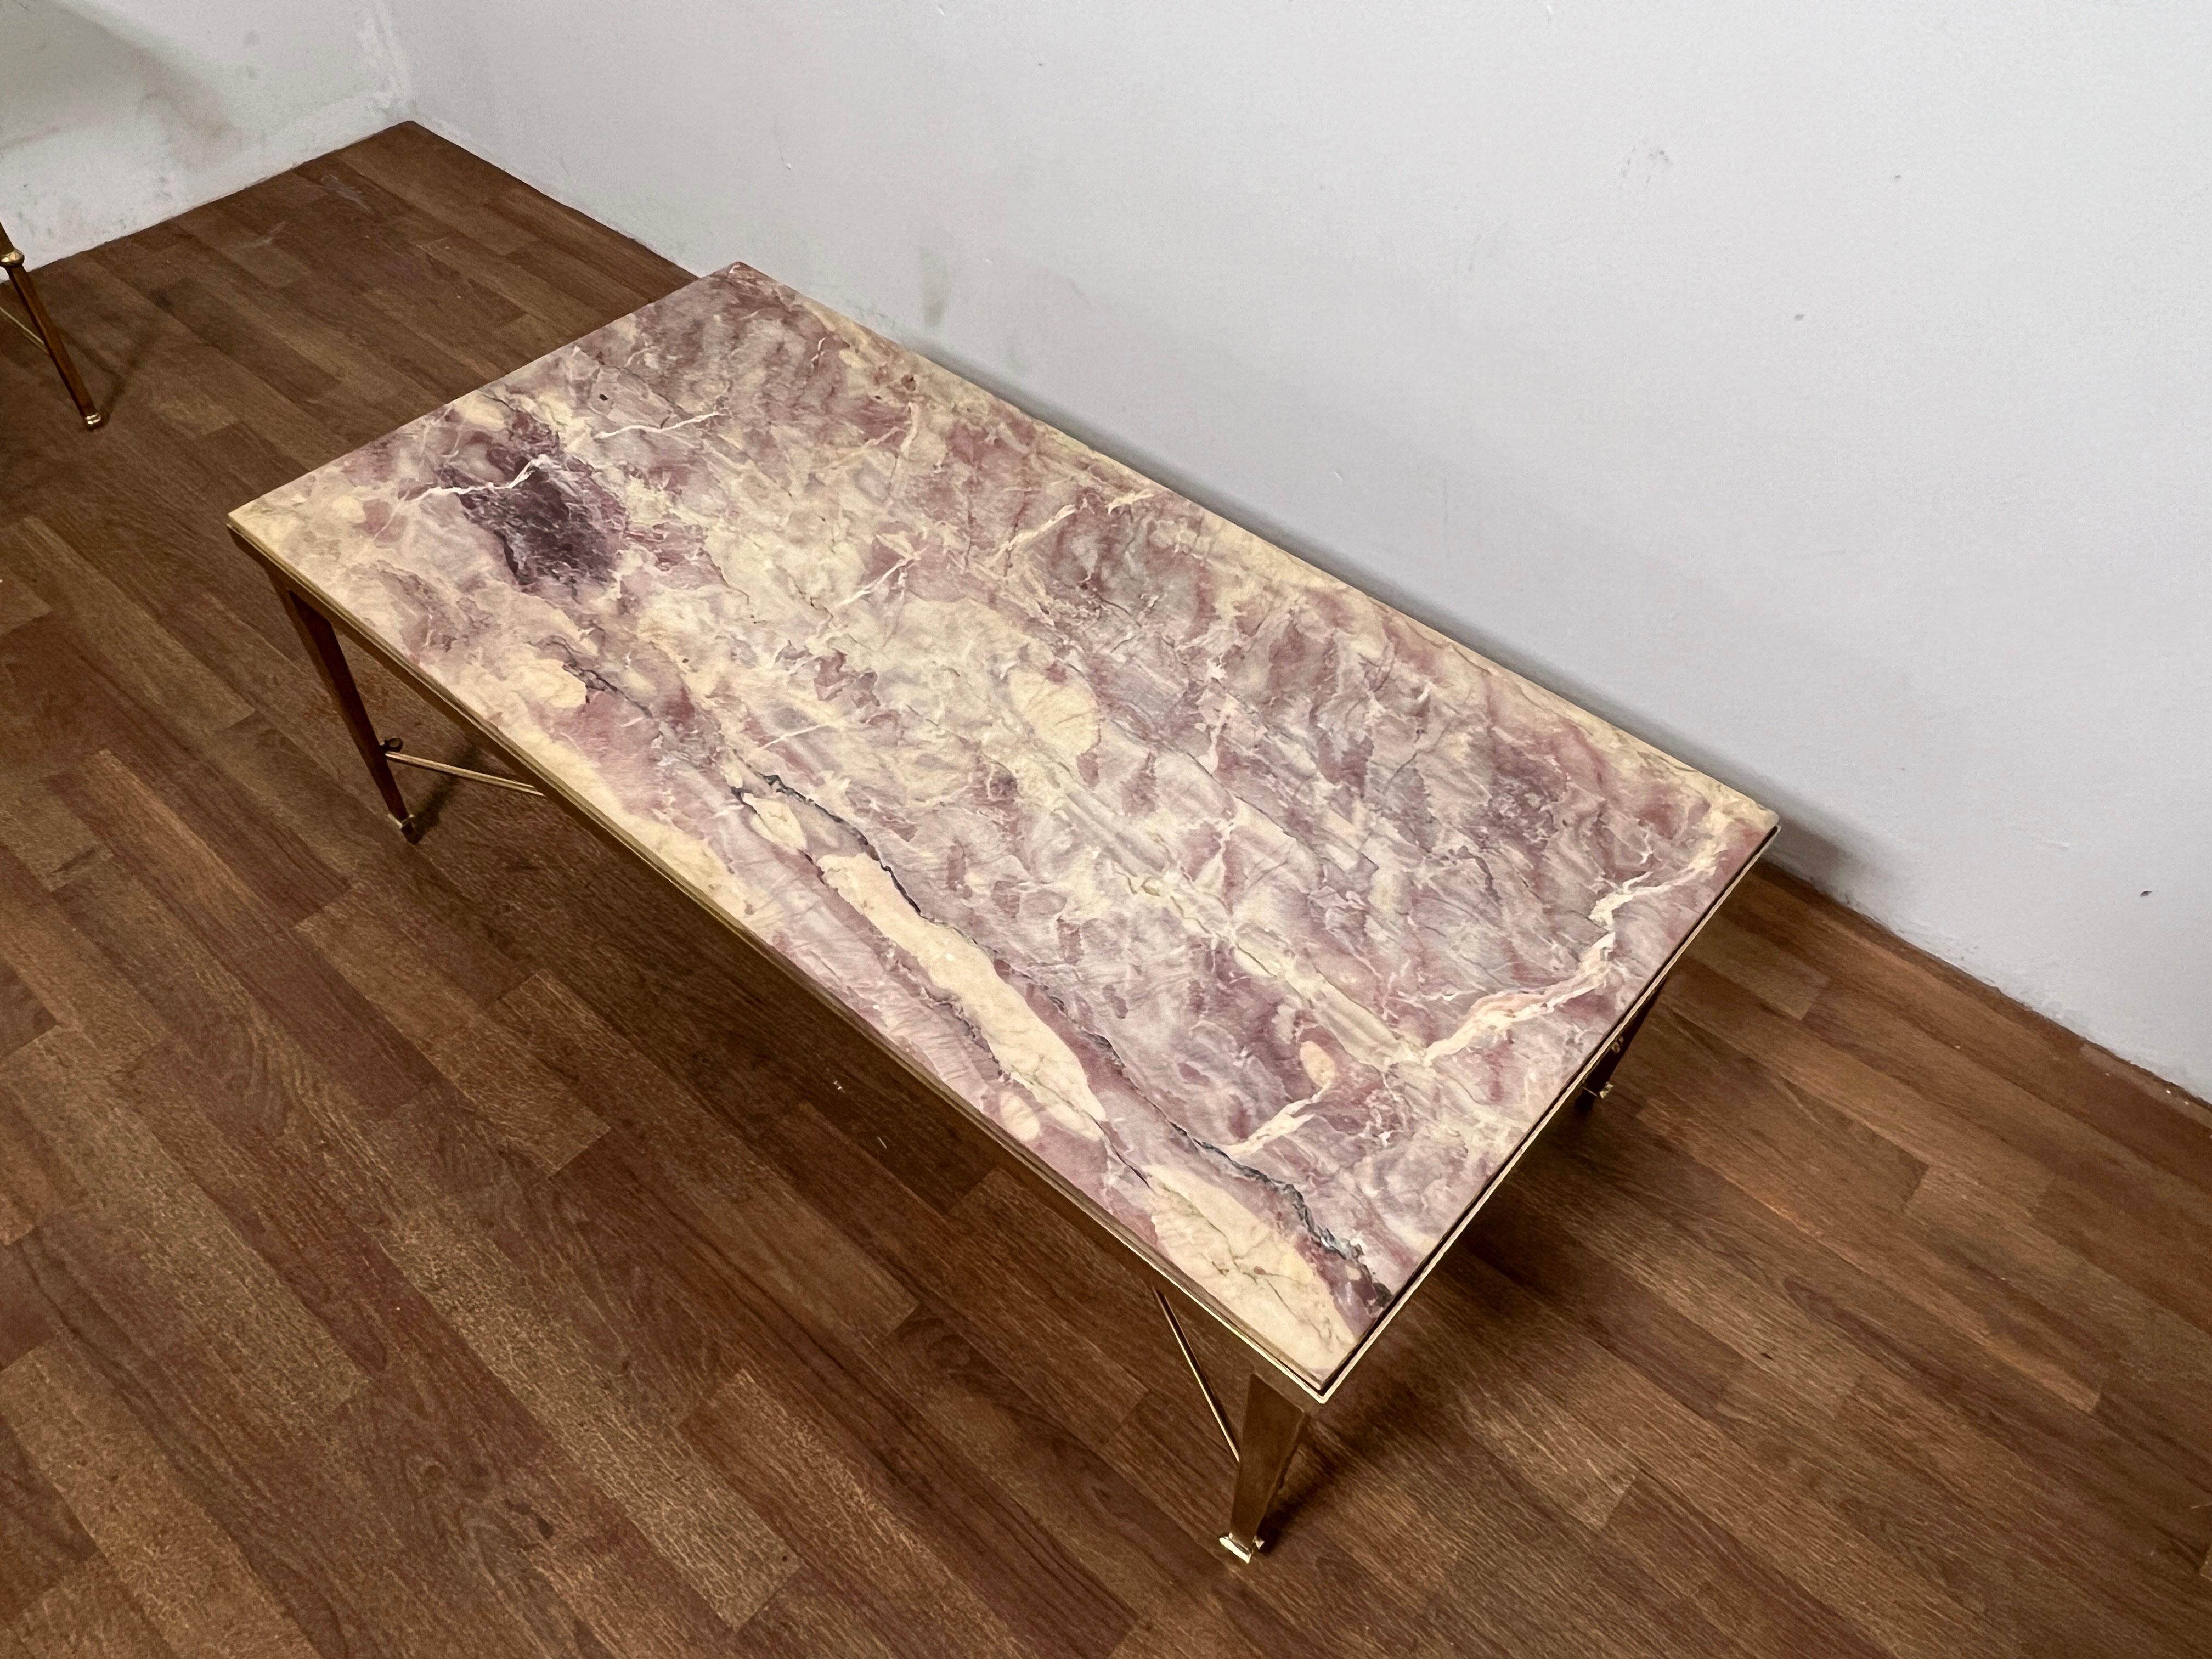 A 1950s solid brass coffee table attributed to Maison Jansen with rare lavender marble top. 
A complementing pair of side tables with matching marble from the same estate are available in another listing.